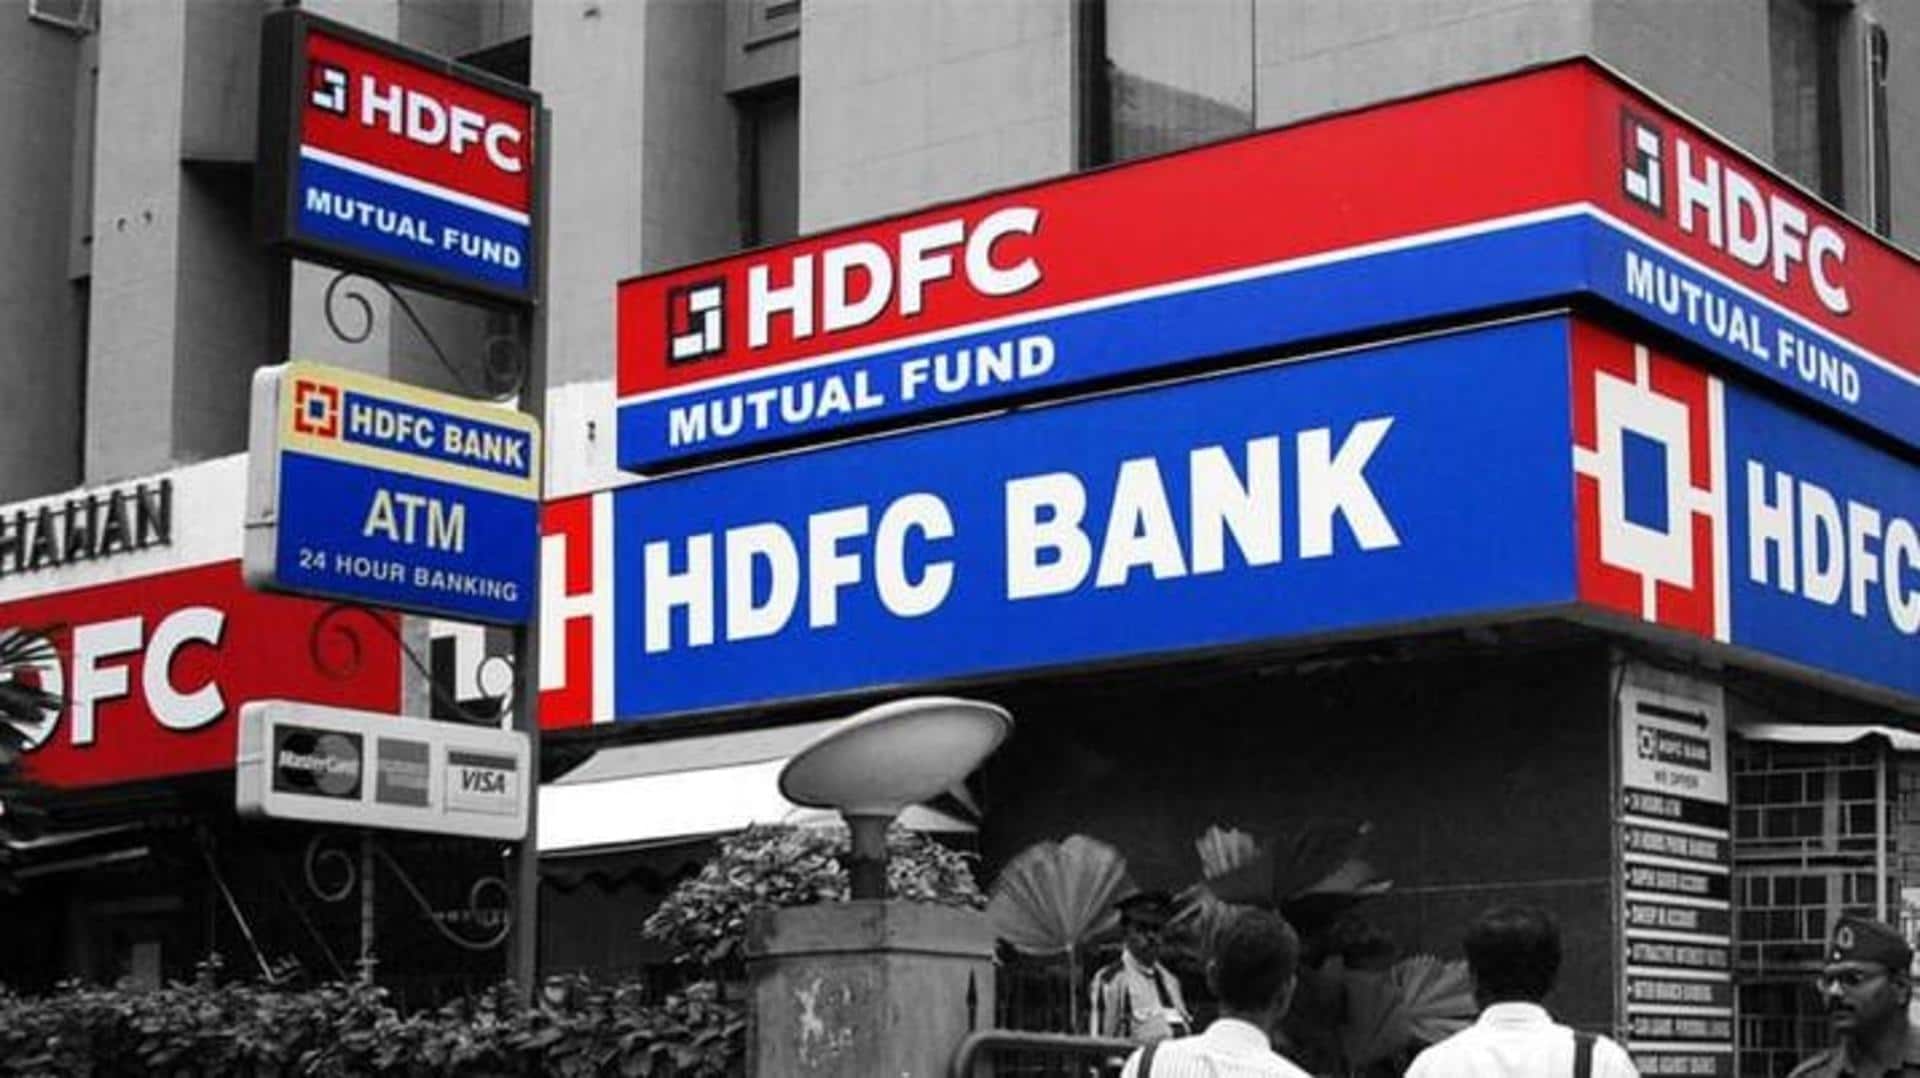 HDFC will be world's 4th most valuable bank after merger